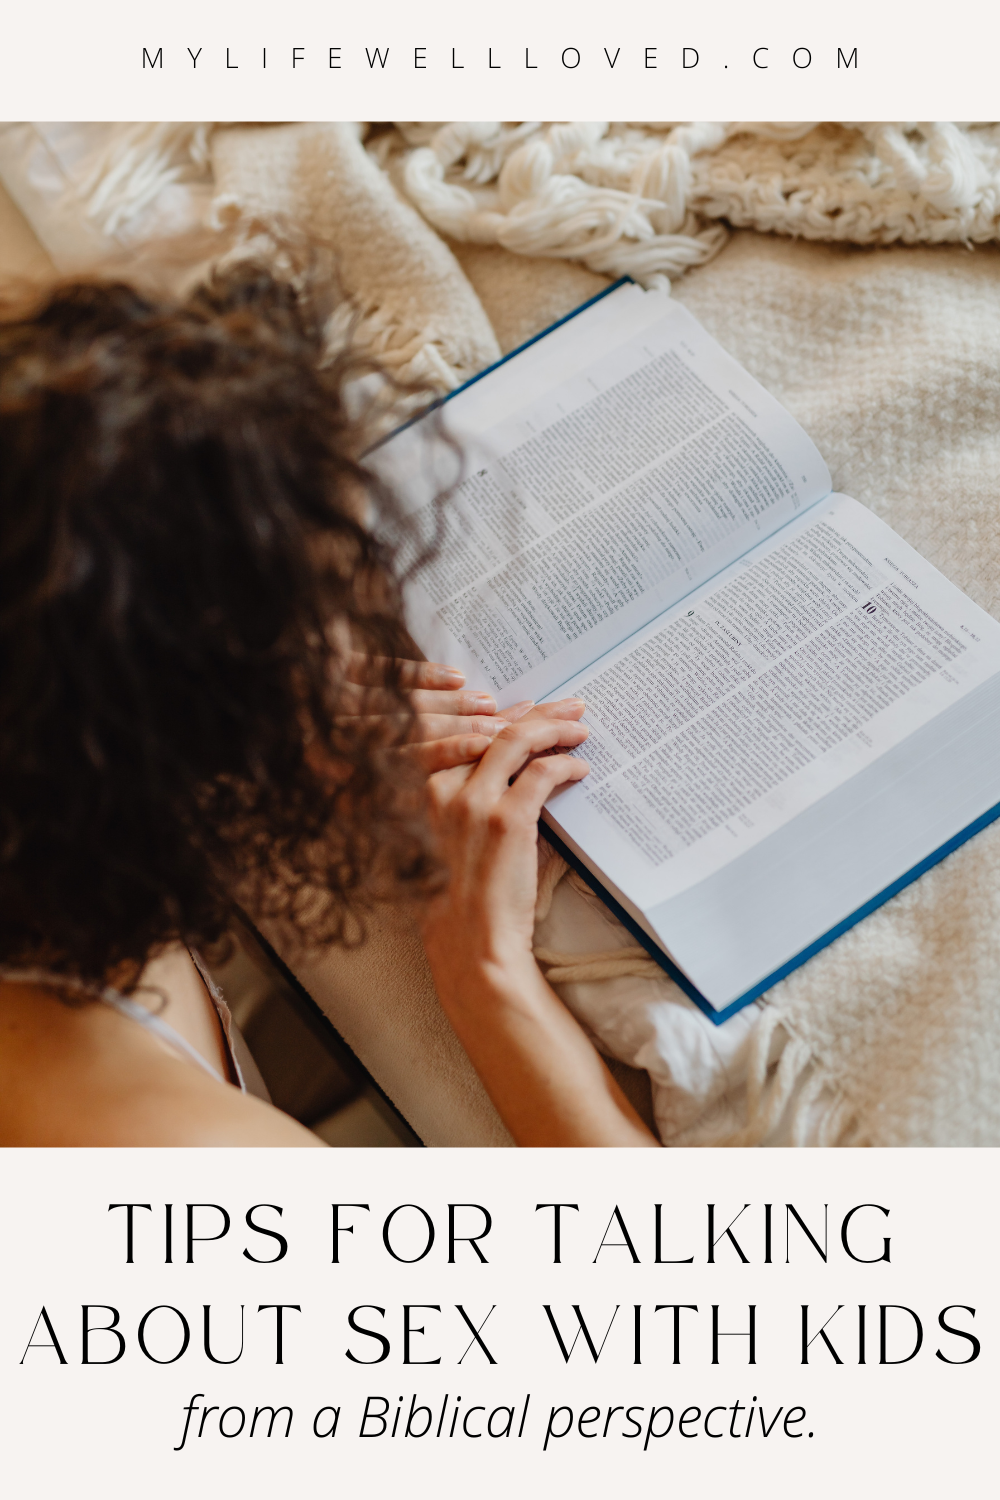 Christian Birmingham podcaster, boy mom, & health coach, Heather Brown, shares all the best tips for talking about sex with kids from a Christian perspective with tips from Lindsey Maestas.